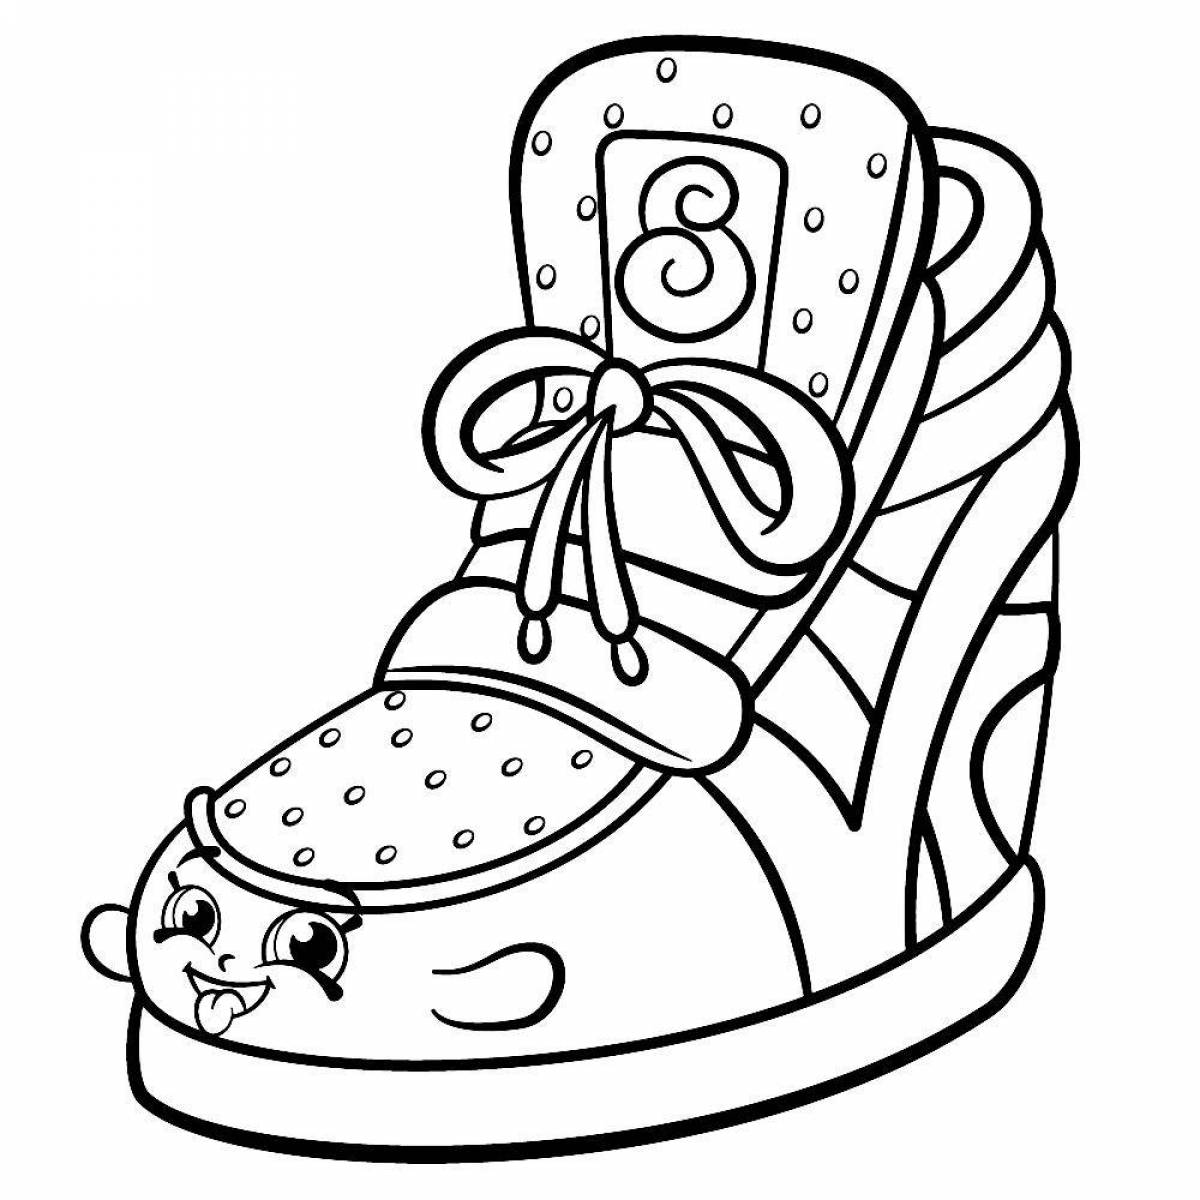 Coloring page dazzling children's shoes